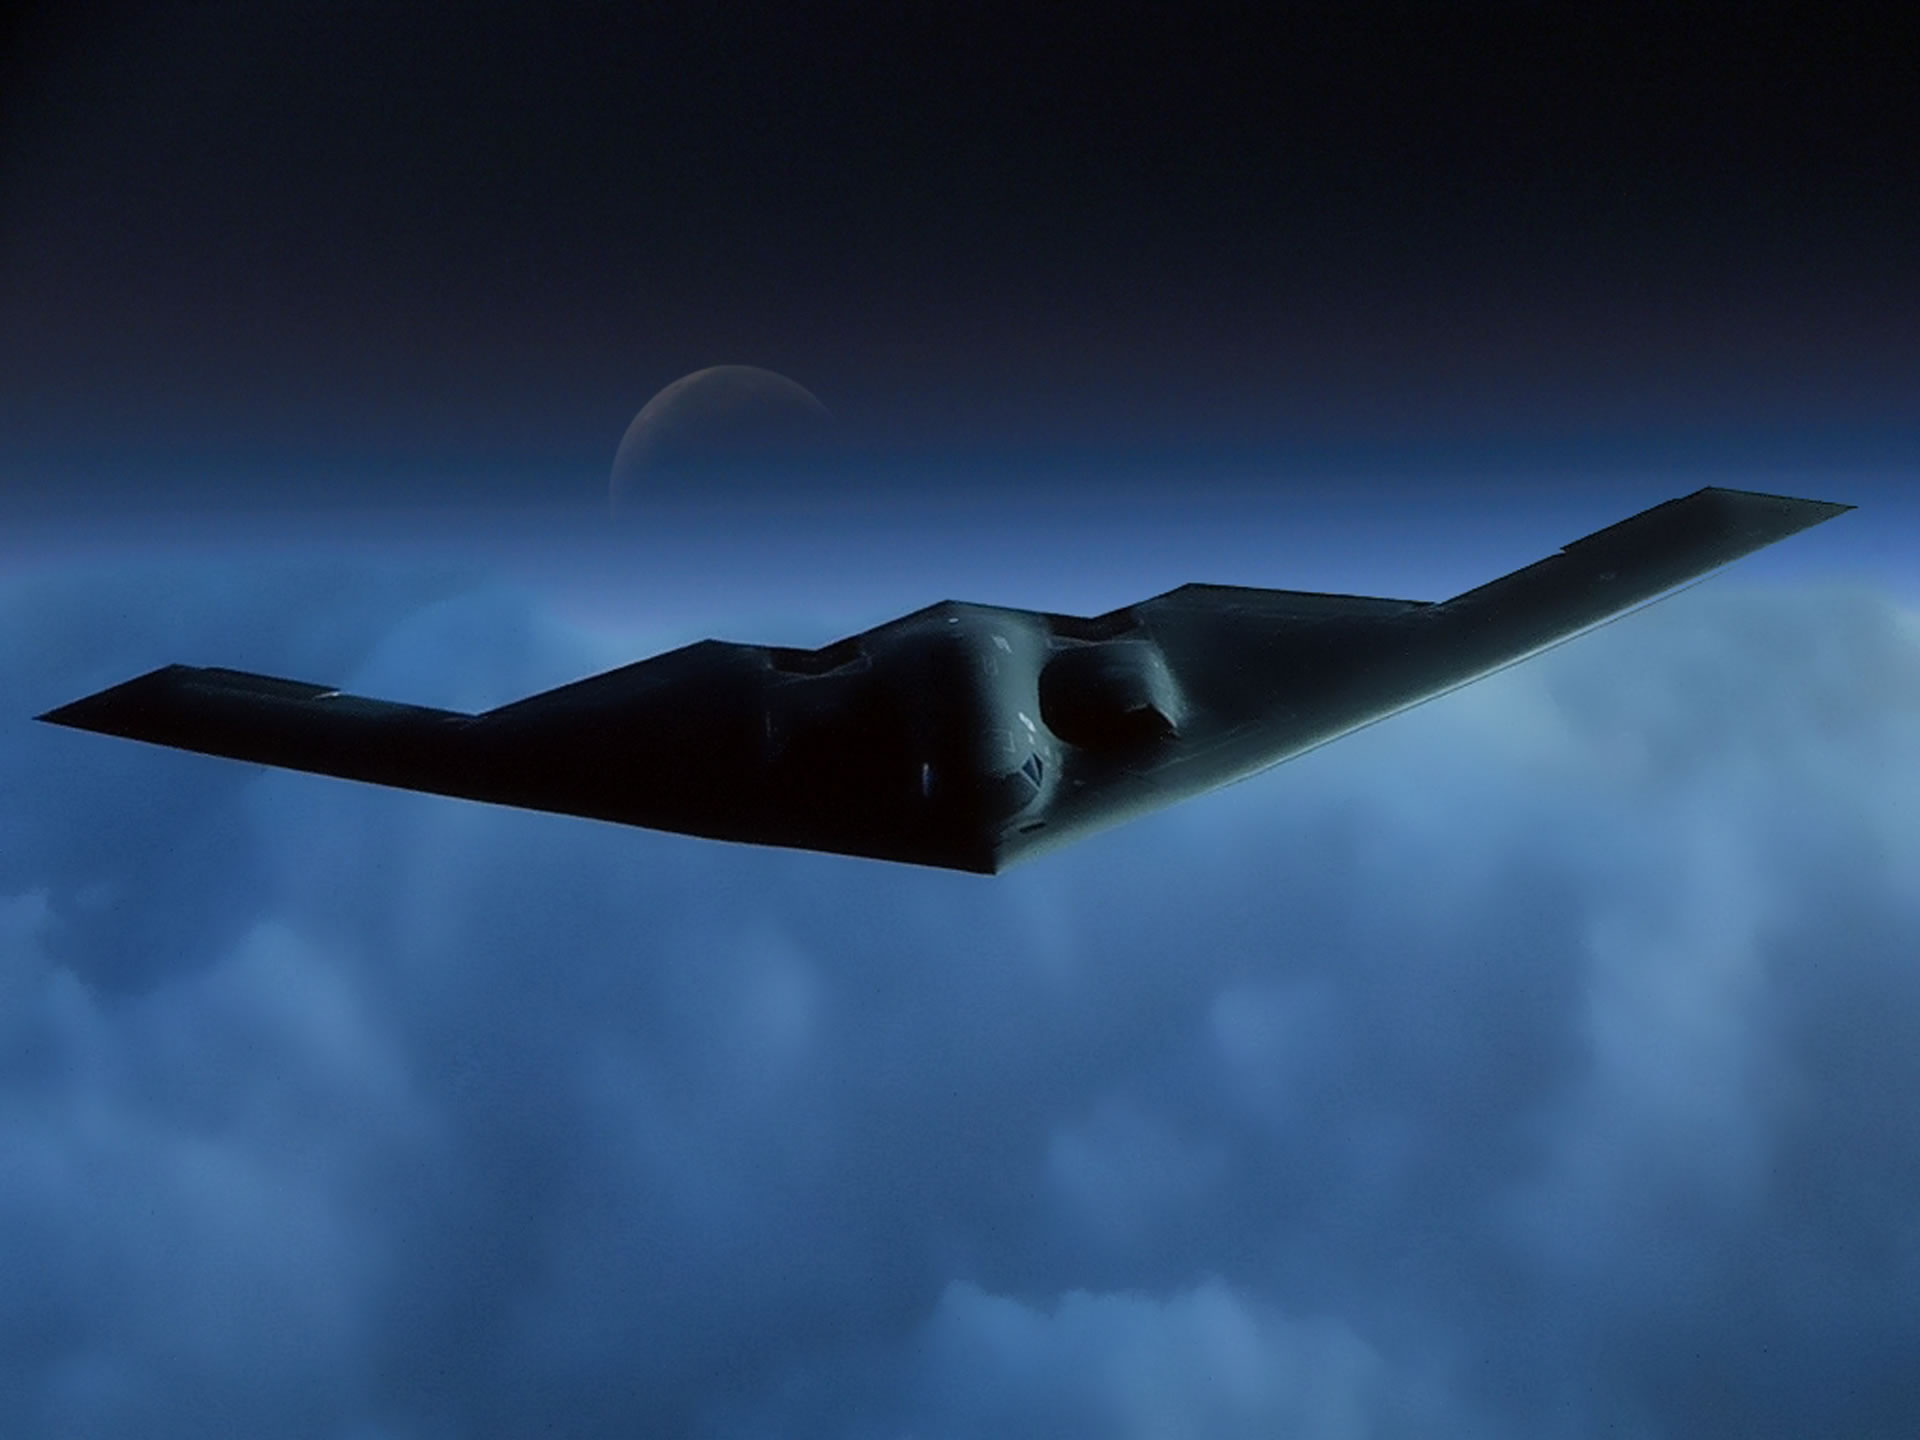 Stealth Bomber Wallpaper Image Amp Pictures Becuo